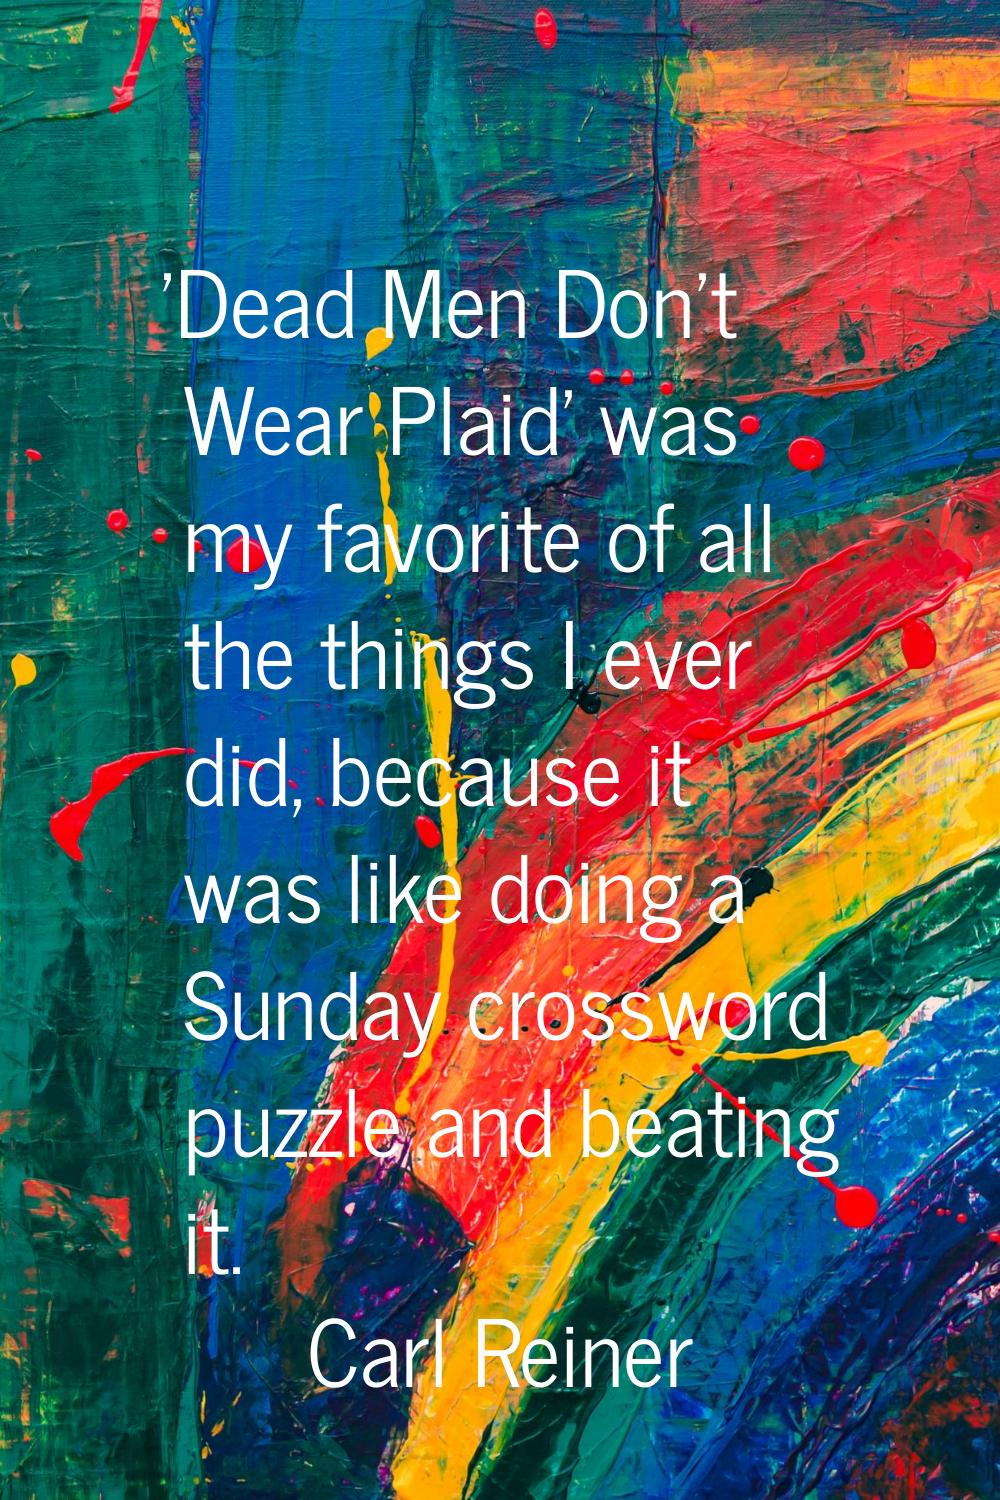 'Dead Men Don't Wear Plaid' was my favorite of all the things I ever did, because it was like doing